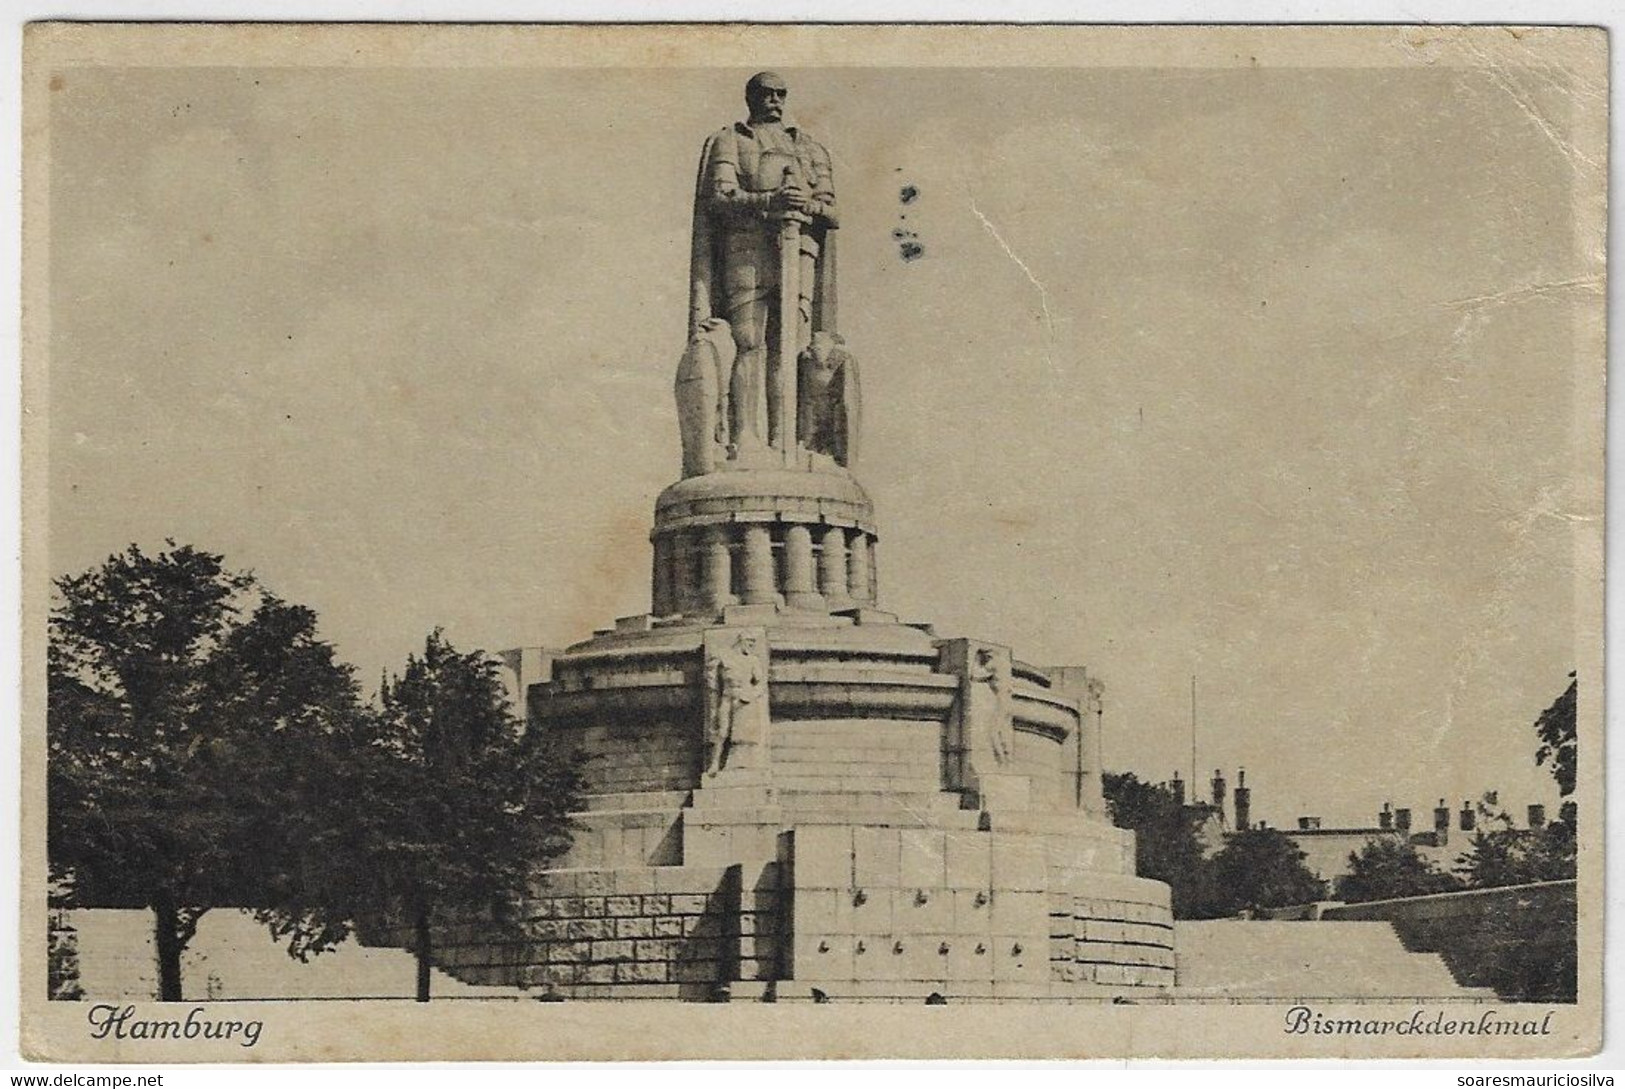 Germany 1928 Postcard Bismarck Monument Hamburg Stamp 15 Pfennig Cancel Wiesbaden The Spa For Autumn And Winter Cures - Hydrotherapy